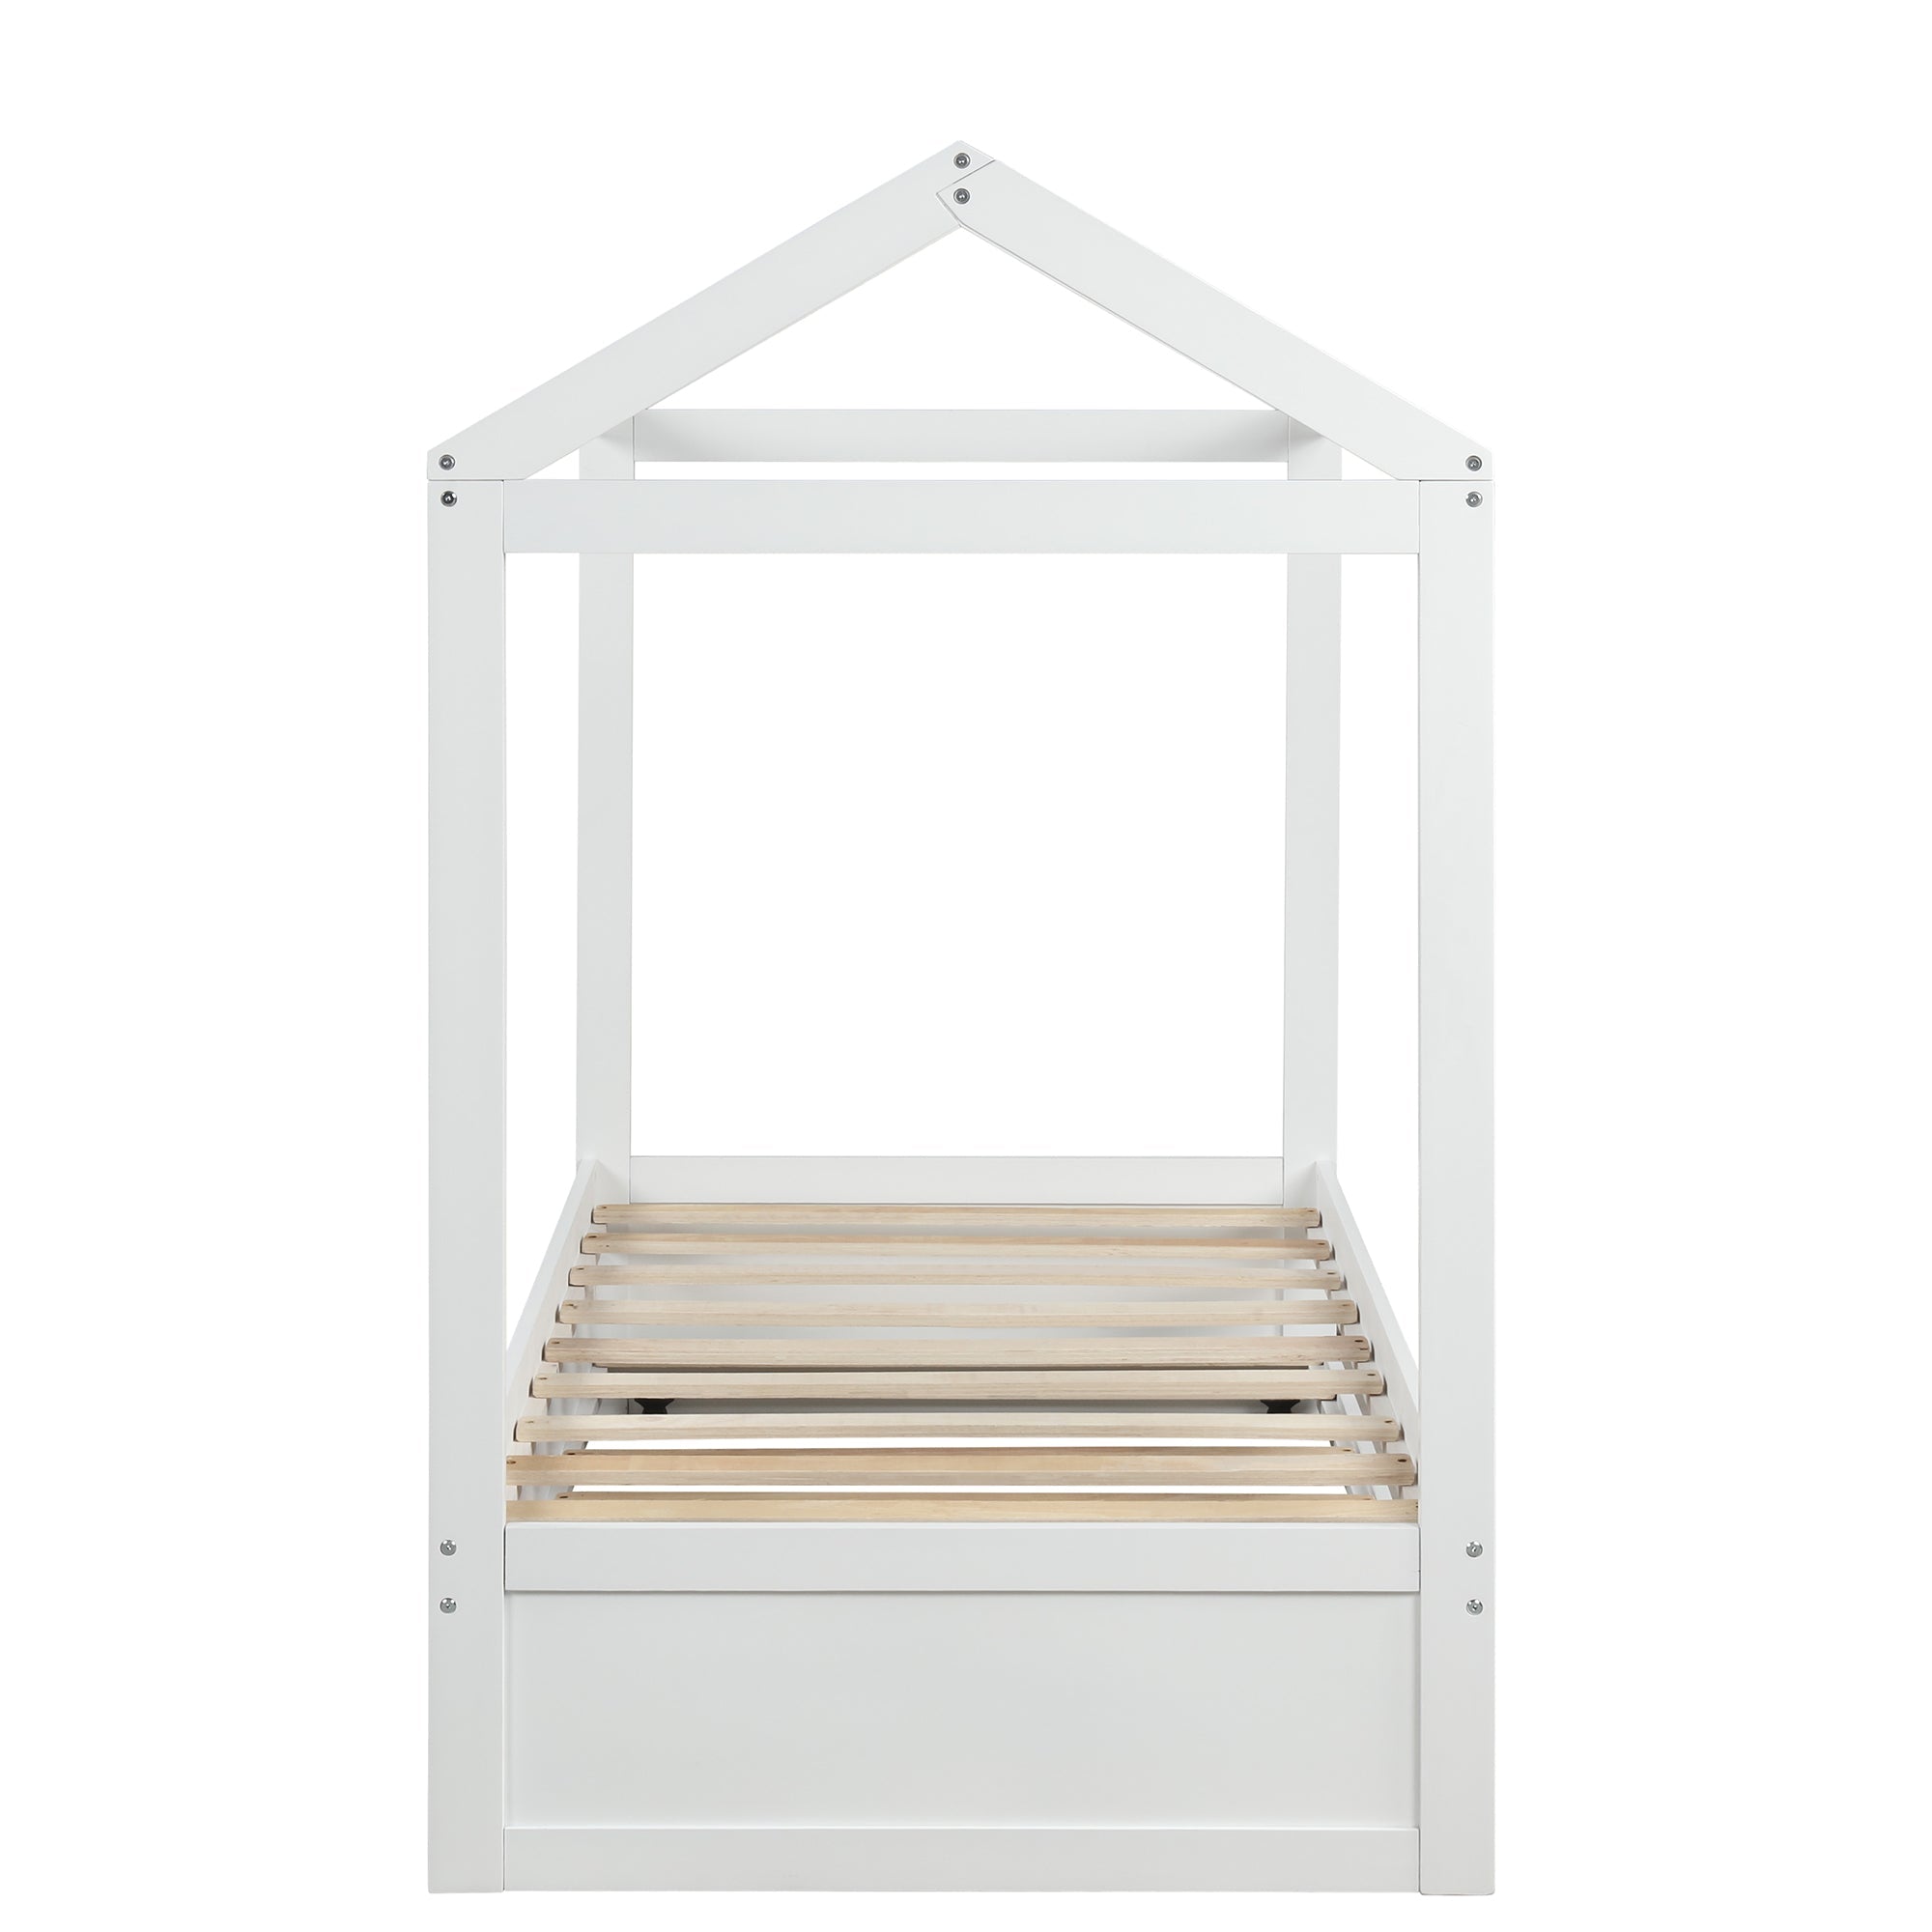 Euroco Pine Wood Twin Size Kids Beach House Bed With Trundle, White